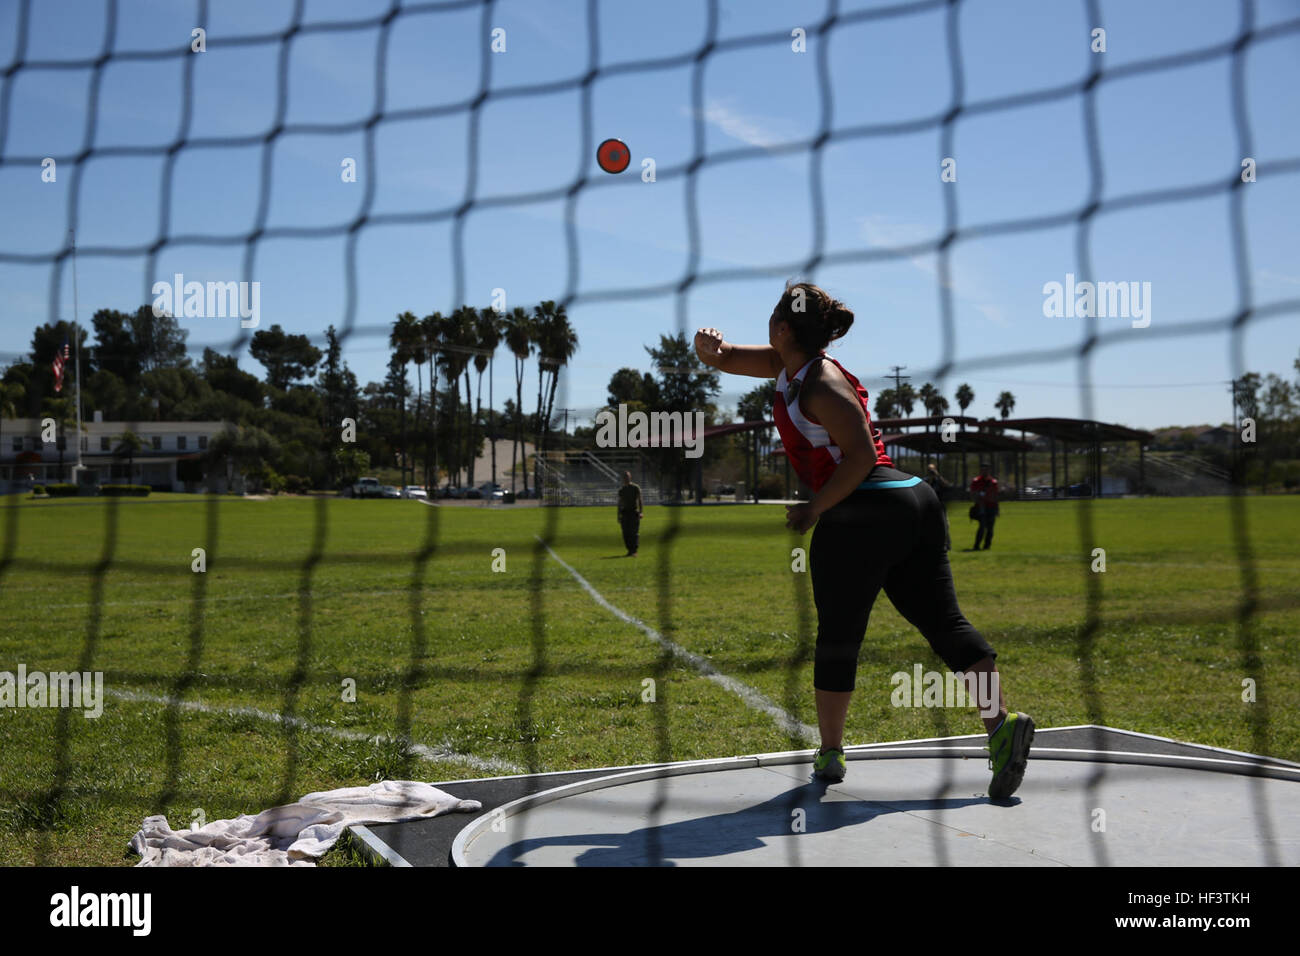 A U.S. Marine with the Wounded Warrior Regiment launches the discus during the field competition at the Marine Corps Trials aboard Marine Corps Base Camp Pendleton, Calif., March 9, 2016. The Trials, an eight-event adaptive sports competition, is hosted by the Wounded Warrior Regiment, the Marine Corps command that facilitates the integration of non-medical and medical care to wounded, ill, and injured Marines and their families. The Trials began March 2, 2016, and end March 9, 2016. (U.S. Marine Corps photo by Cpl. Jessika Acosta /Released) Marine Corps Trials- Field Competition 160309-M-ND73 Stock Photo